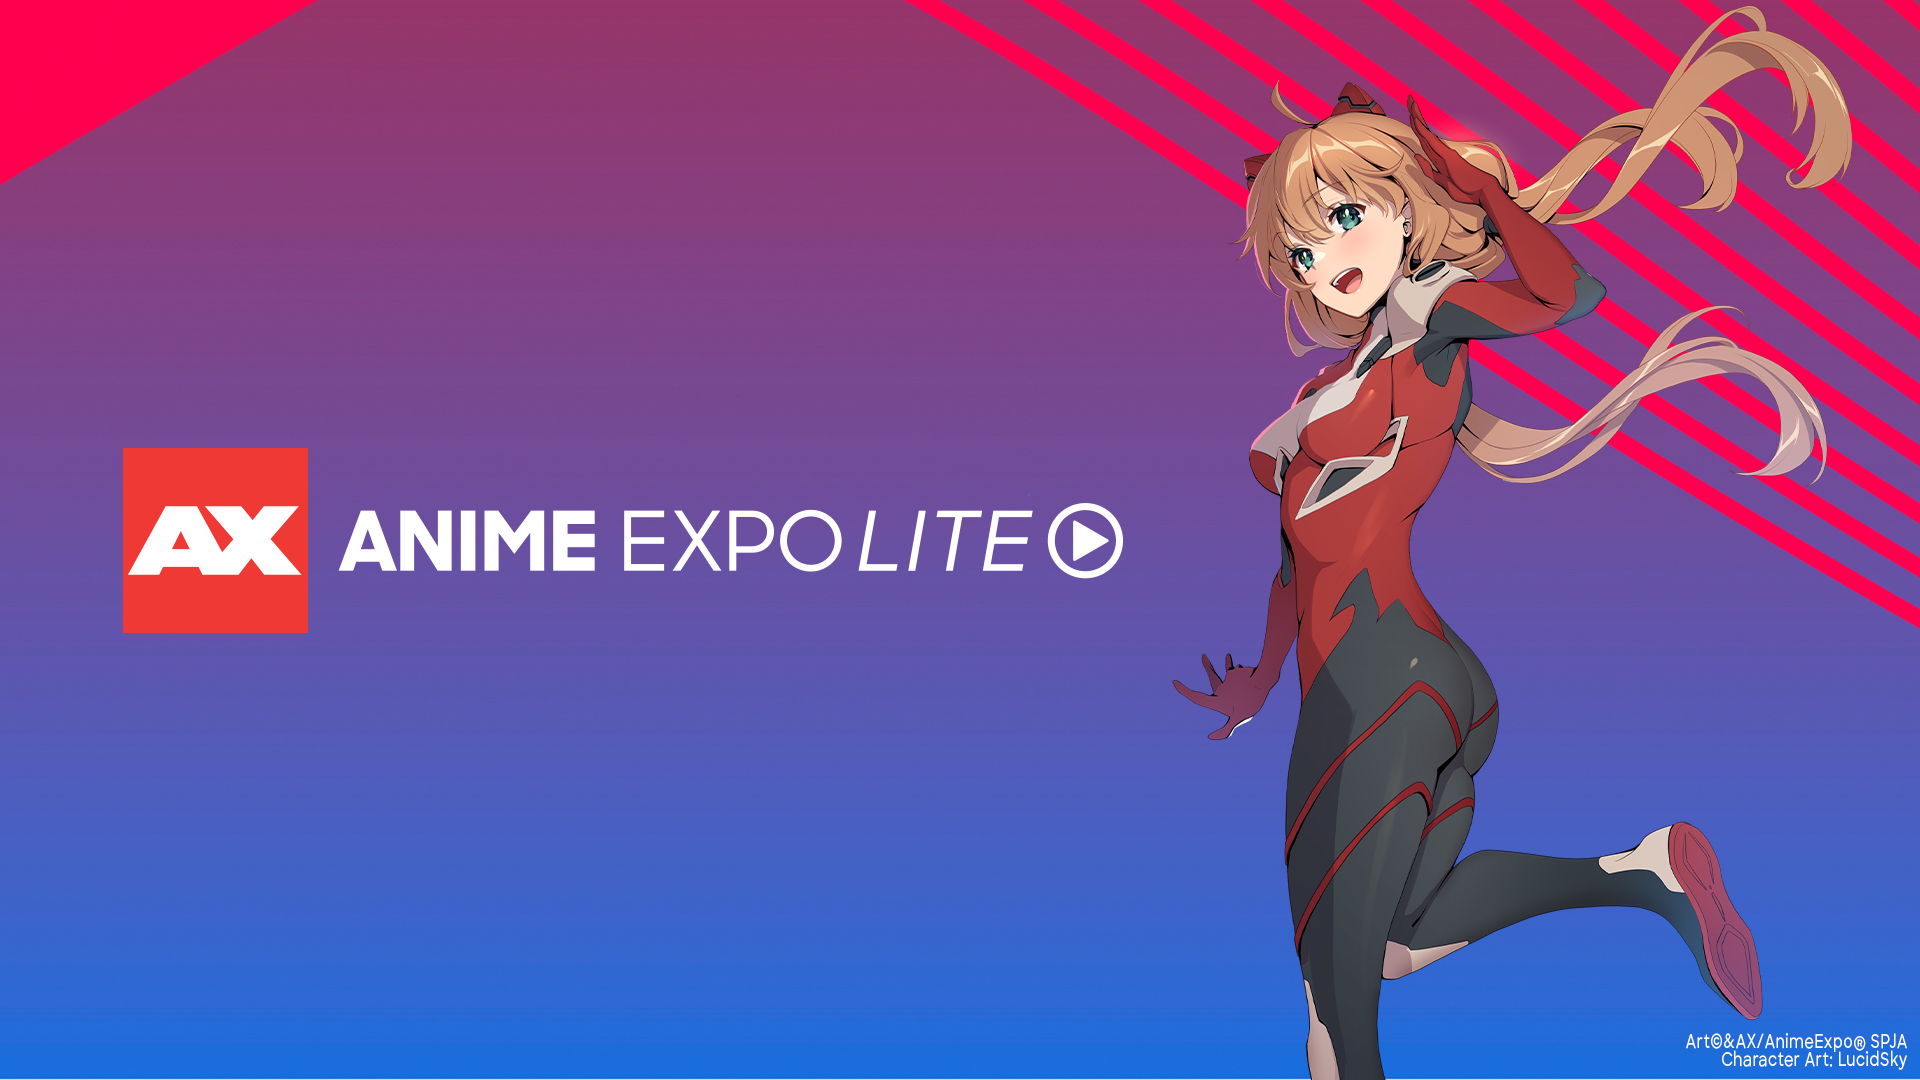 Anime Expo Chibi: How to register, what to expect, and more